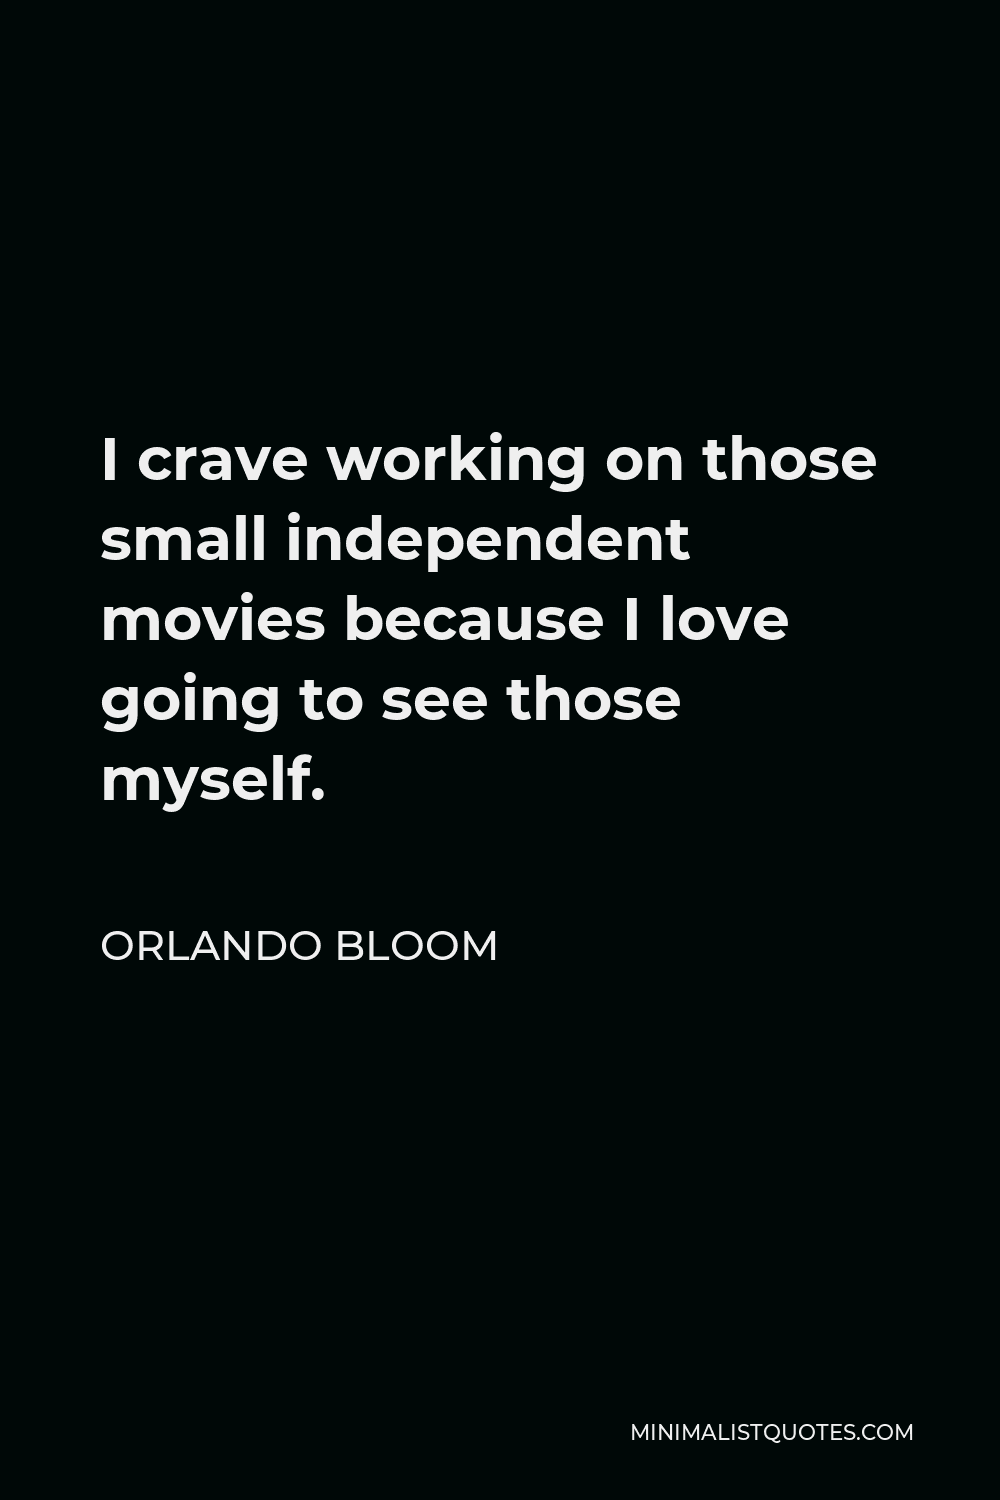 Orlando Bloom Quote - I crave working on those small independent movies because I love going to see those myself.